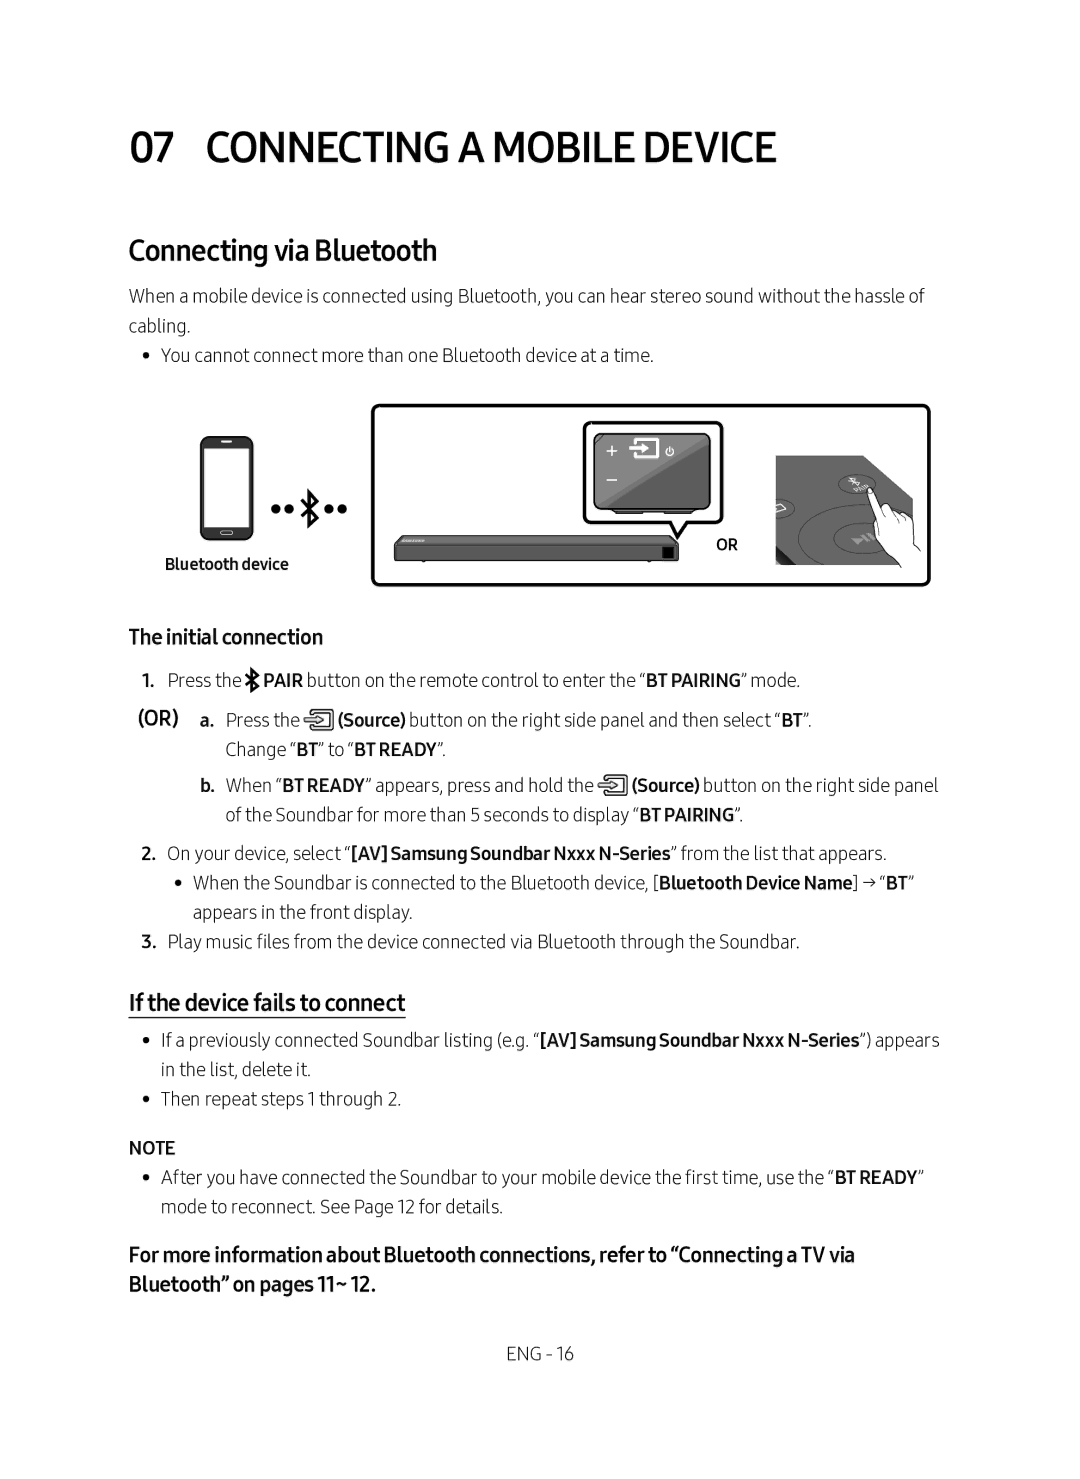 Samsung HW-N450/ZF Connecting a Mobile Device, Connecting via Bluetooth, If the device fails to connect, Bluetooth device 